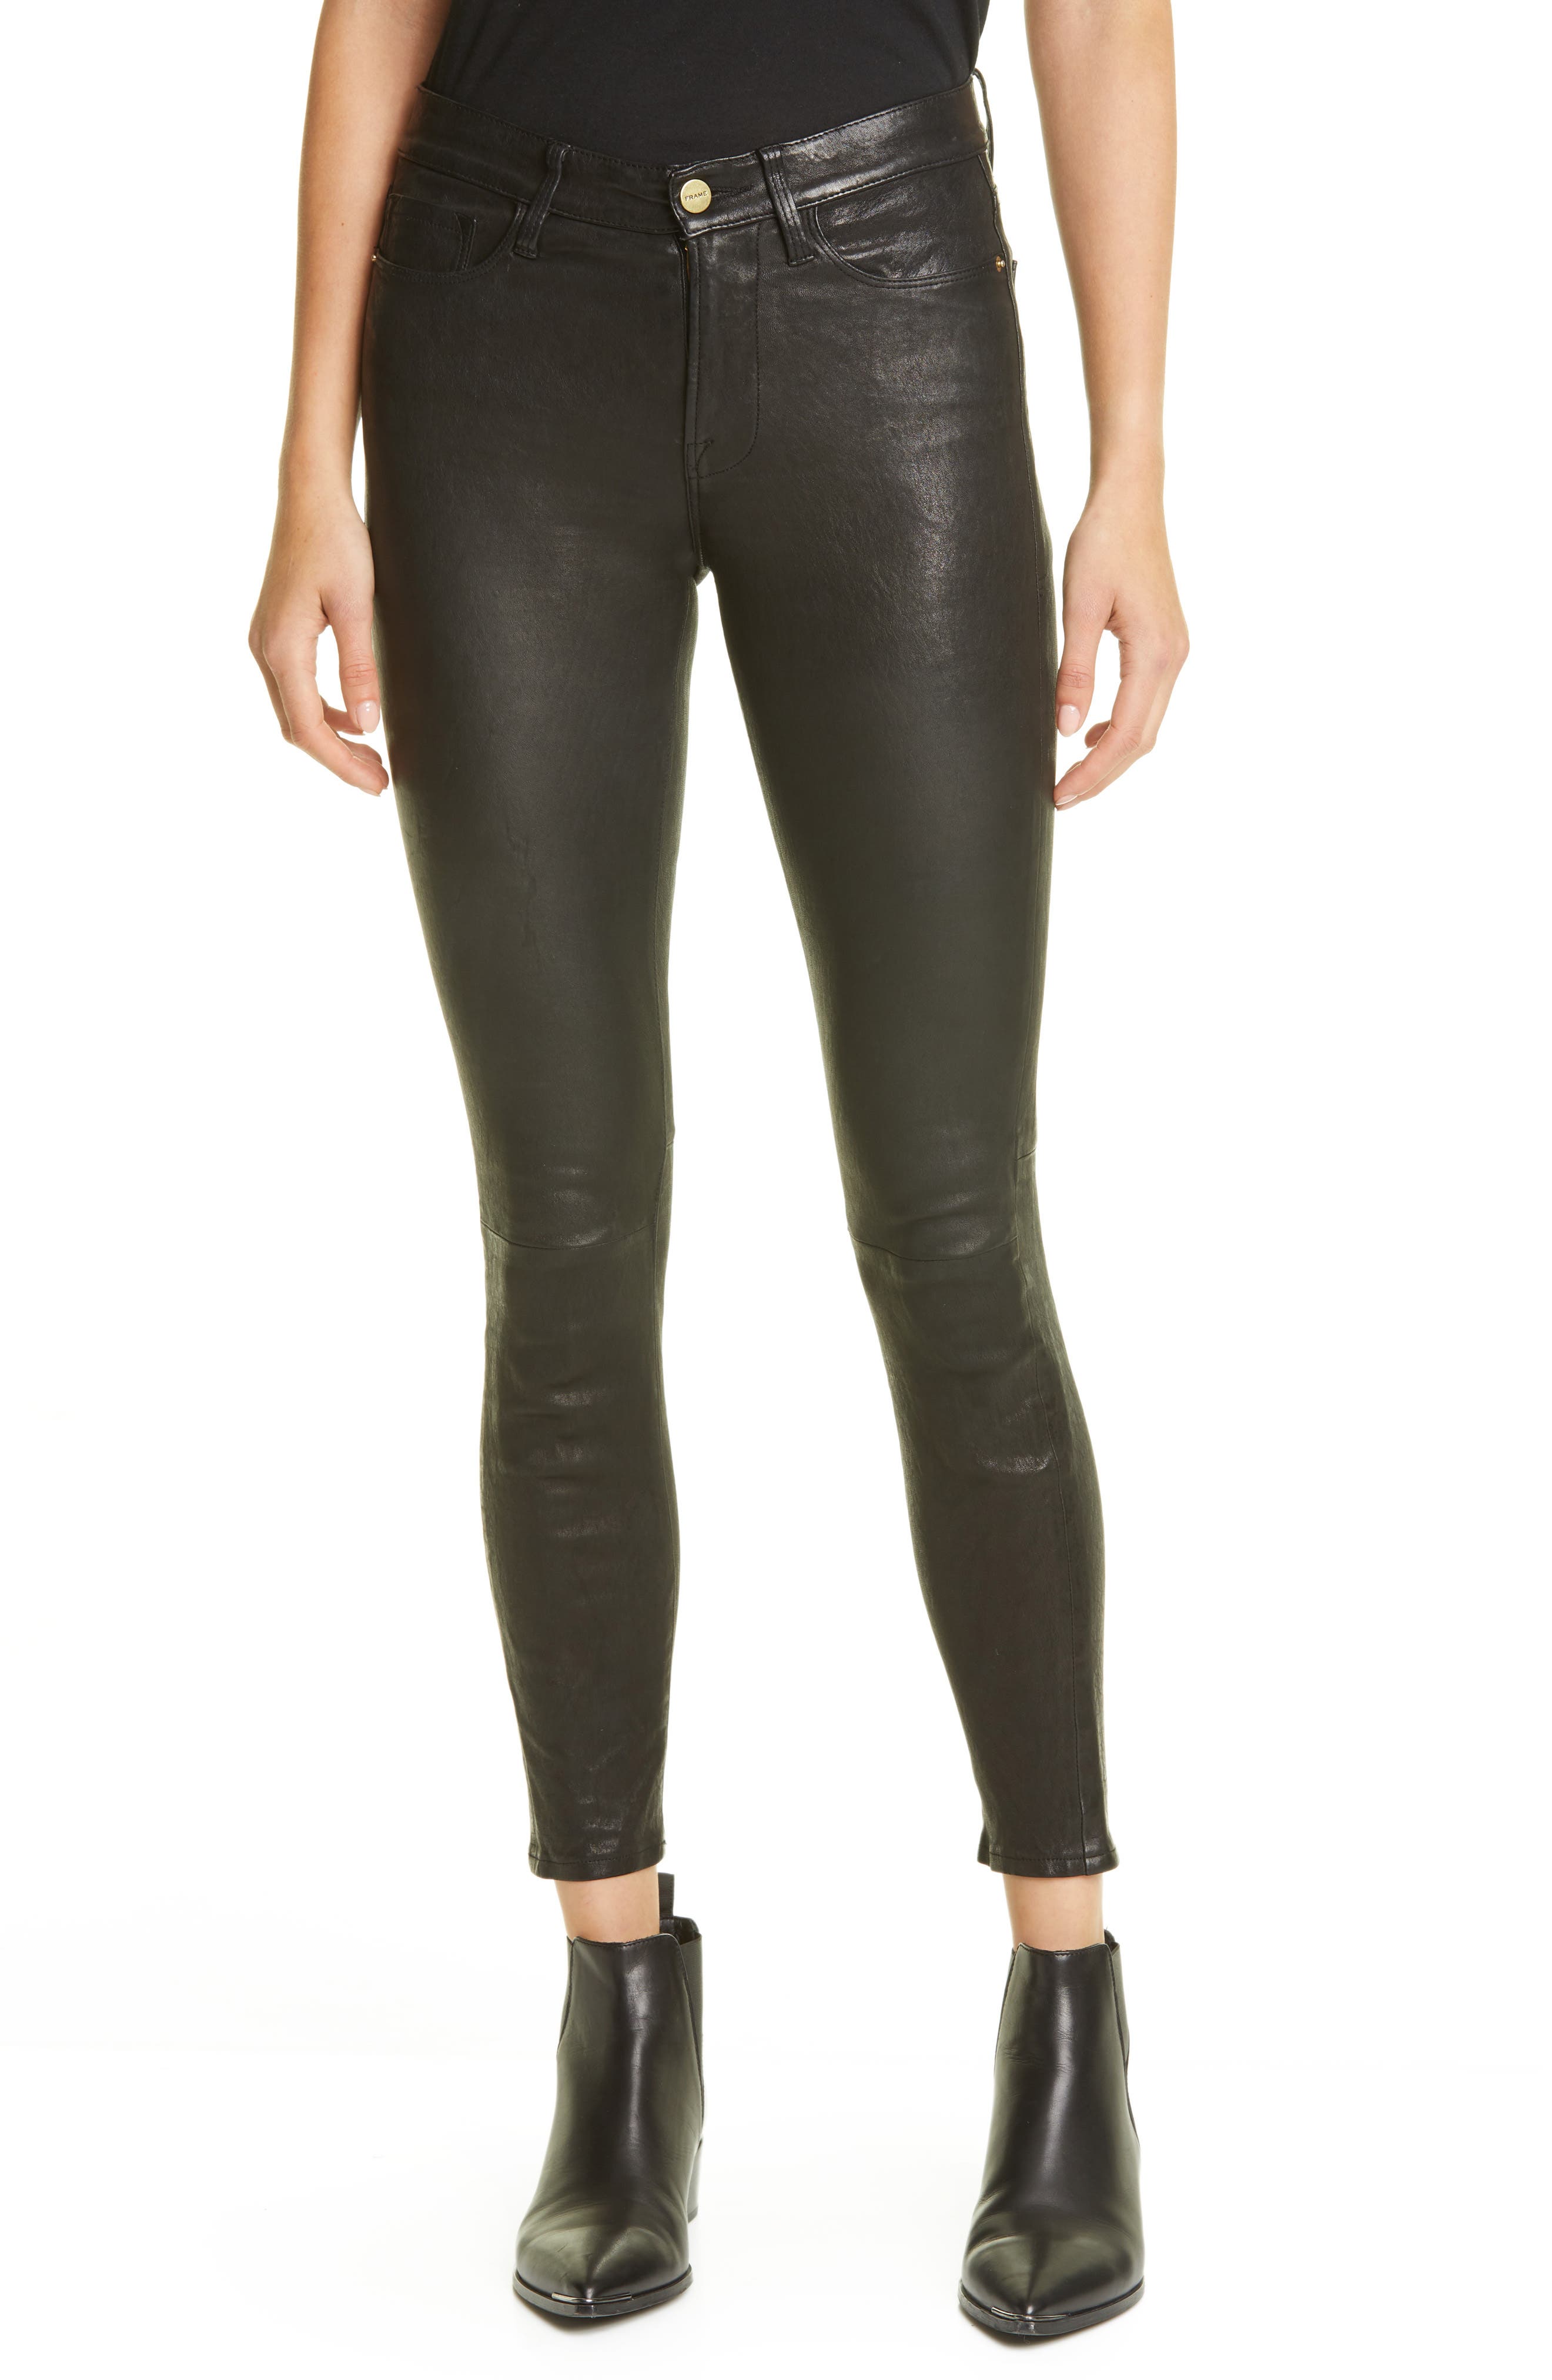 leather pants for women near me